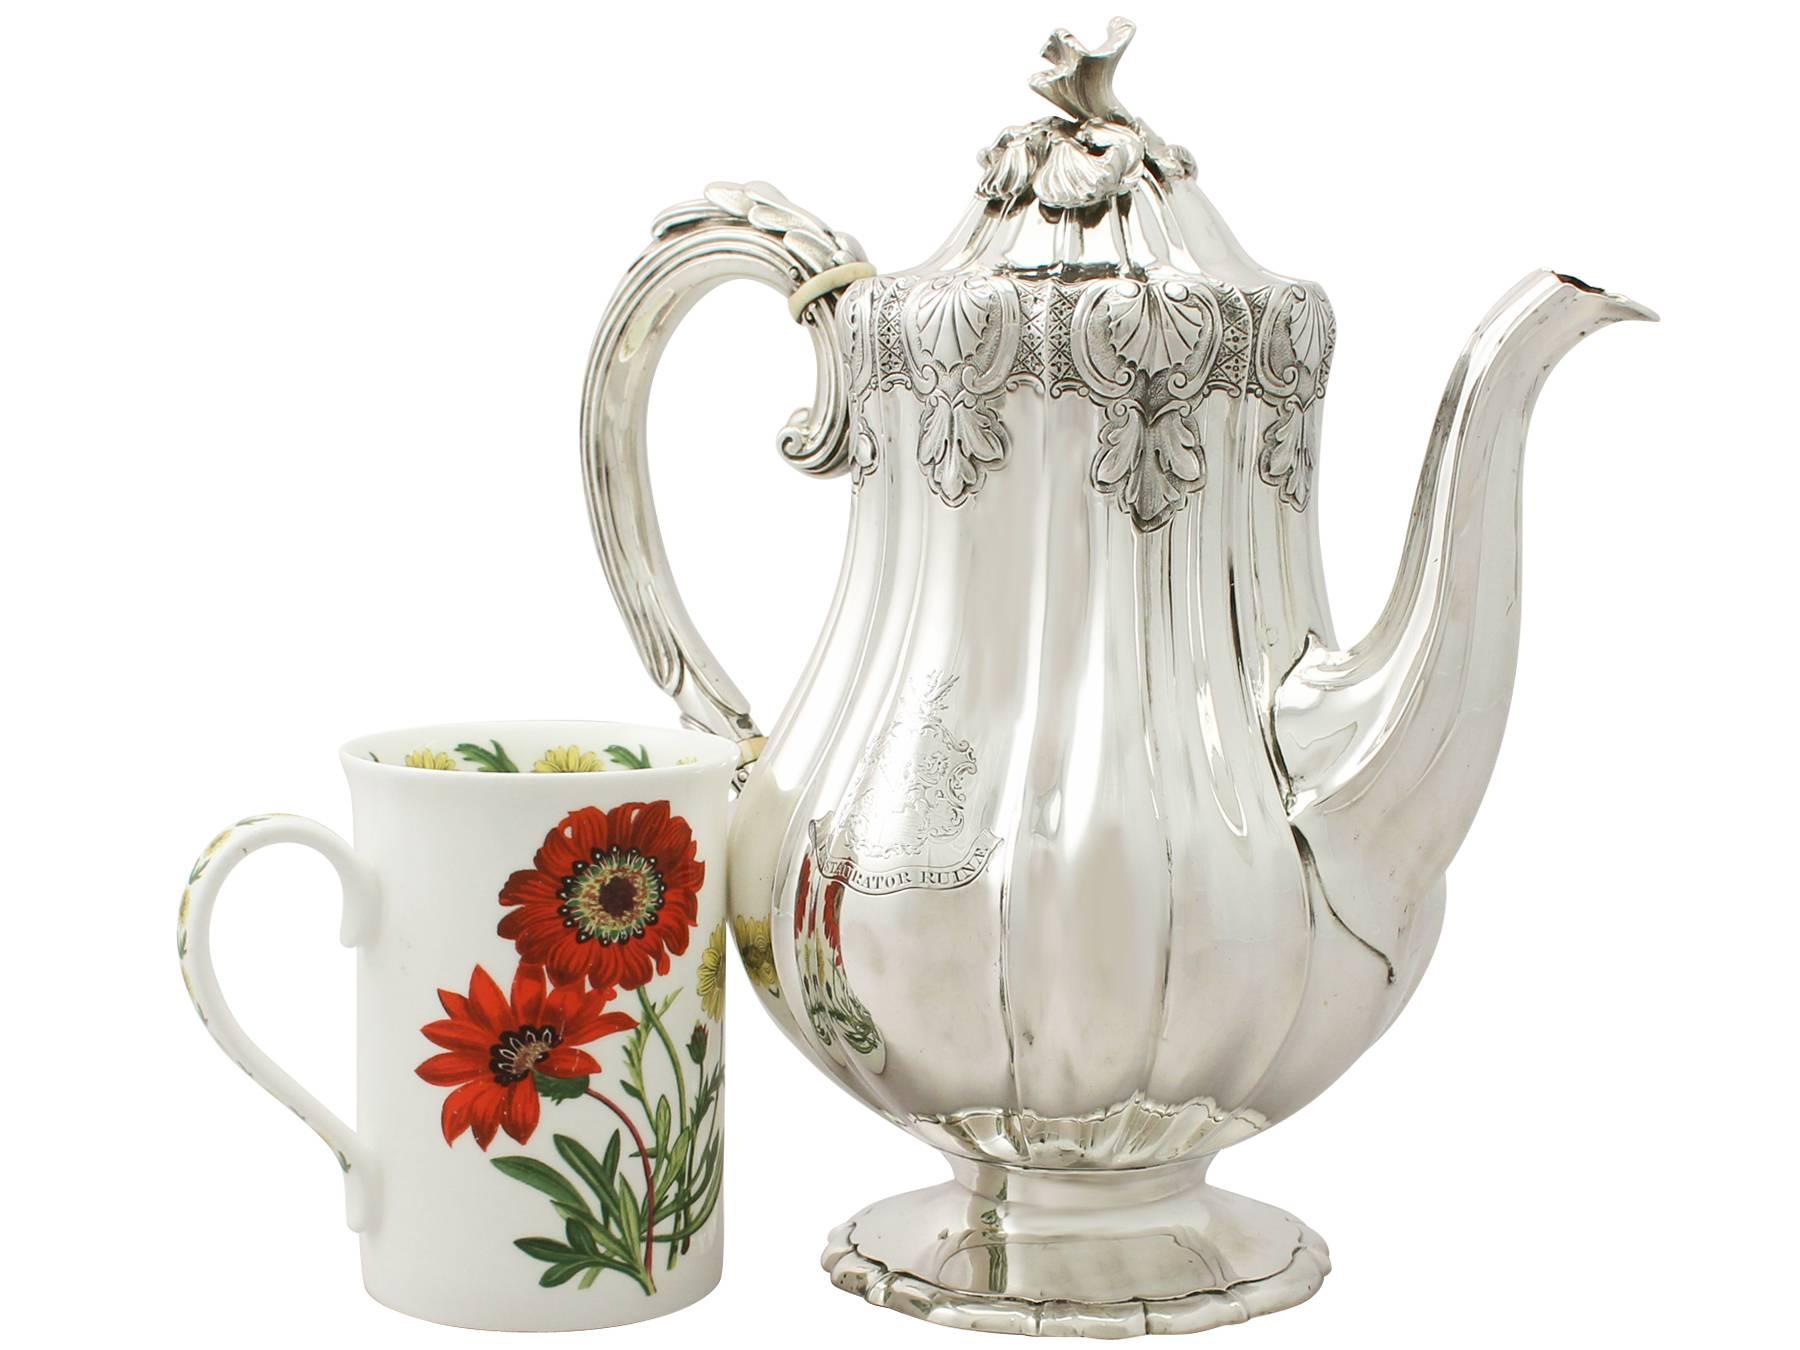 An exceptional, fine and impressive antique George IV English sterling silver coffee pot; an addition to our silver teaware collection

This exceptional antique George IV sterling silver coffee pot has a baluster, melon shaped form.

The upper